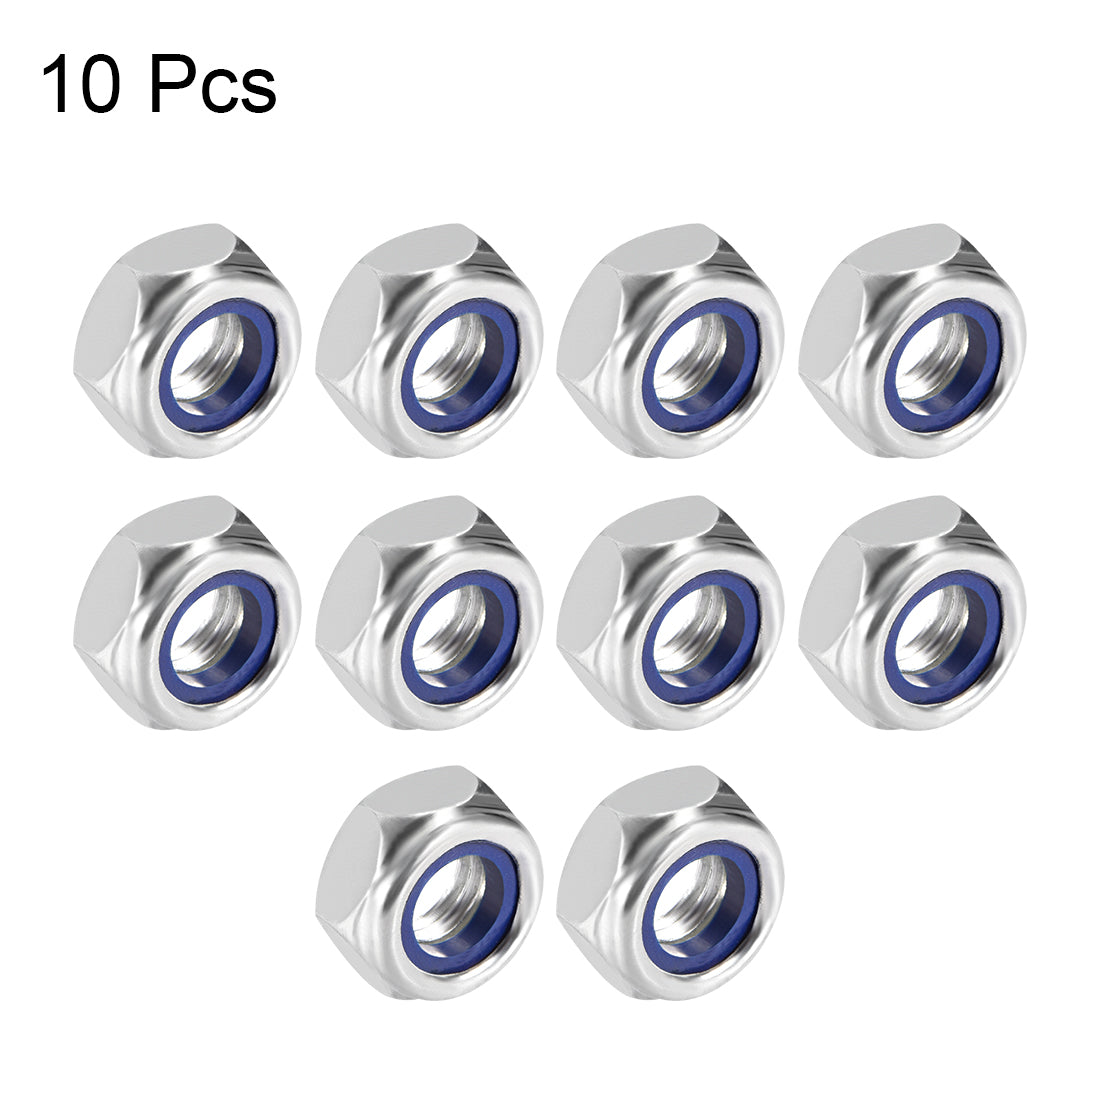 uxcell Uxcell M10 x 1.5mm Nylon Insert Hex Lock Nuts, Carbon Steel White Zinc Plated, 10 Pcs